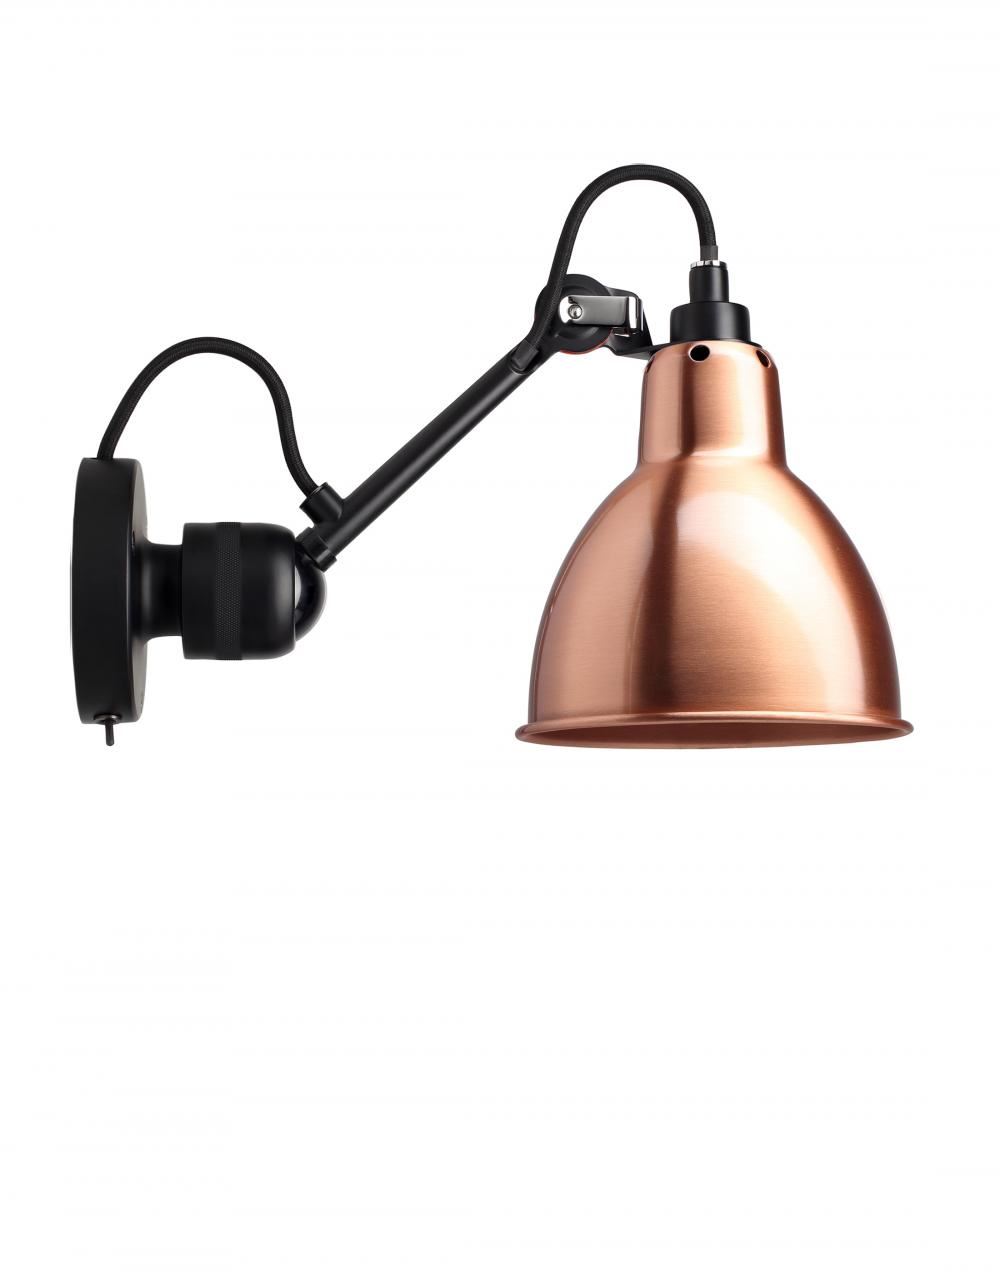 Lampe Gras 304 Small Wall Light Black Arm Copper Shade With White Interior Round Integral Switch